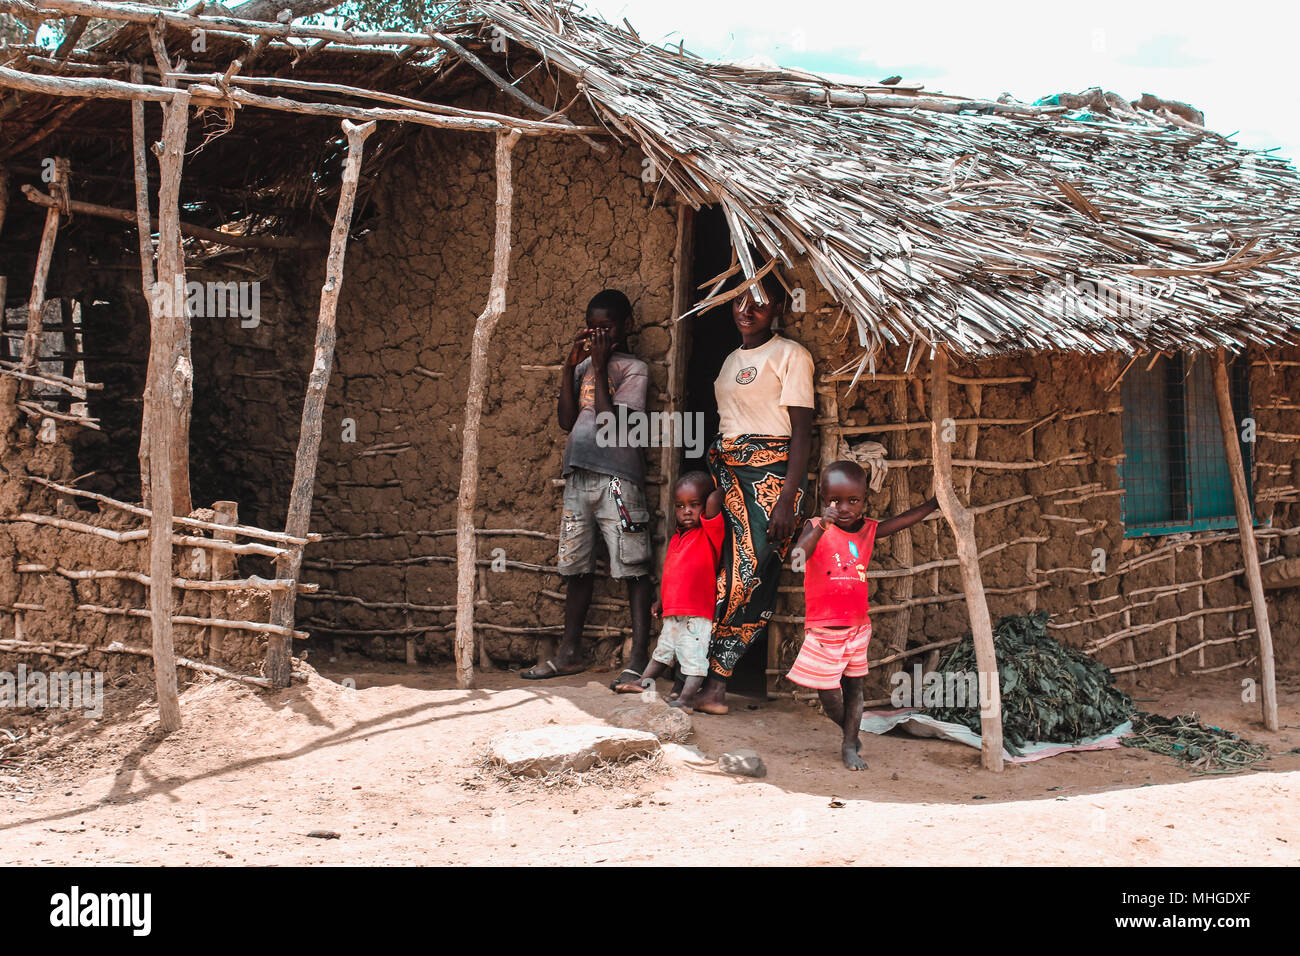 A poor African family composed of three children and their mother, put out of their hut made of excrement and cement on the borders of the Savannah Stock Photo